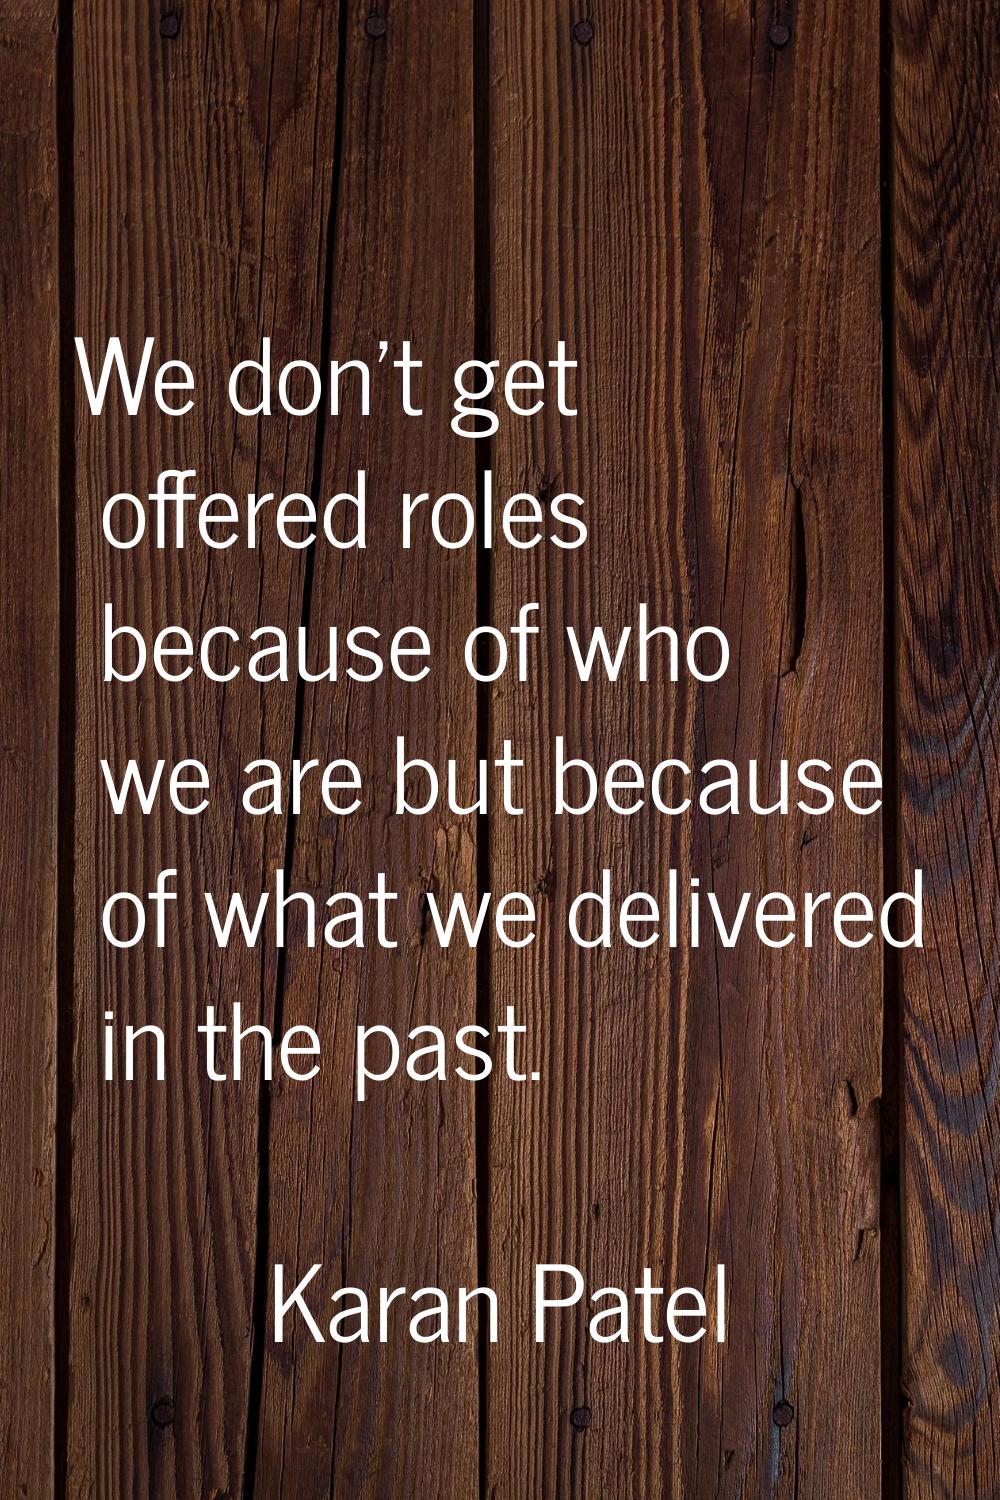 We don't get offered roles because of who we are but because of what we delivered in the past.